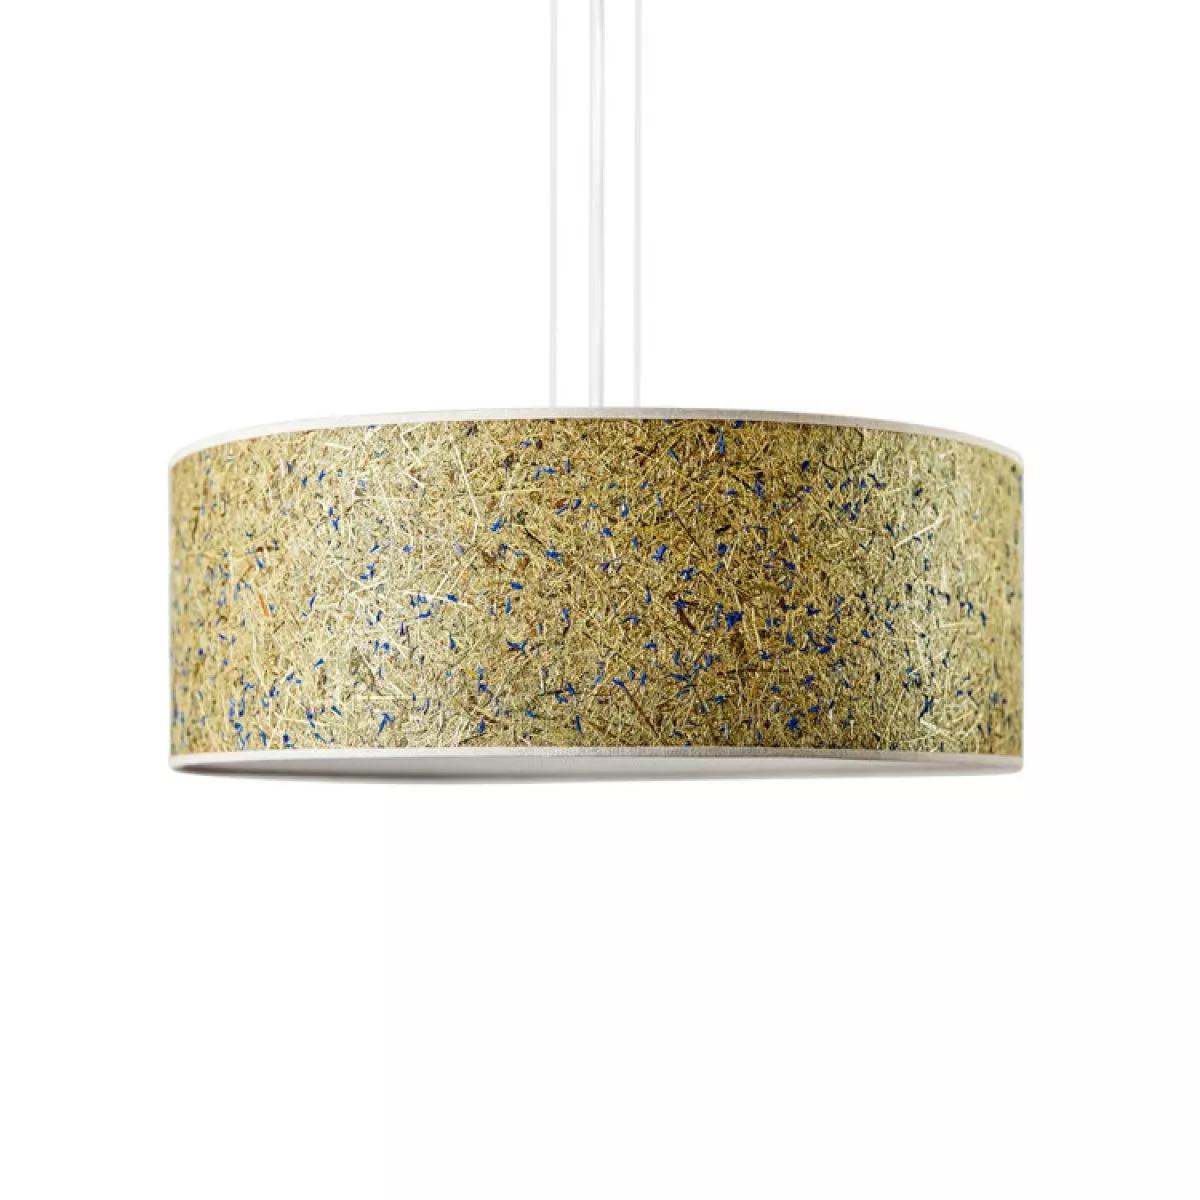 Design Pendant Lamp with Shade made of Alpine Hay and Corn Flower Petals Ø 35 cm